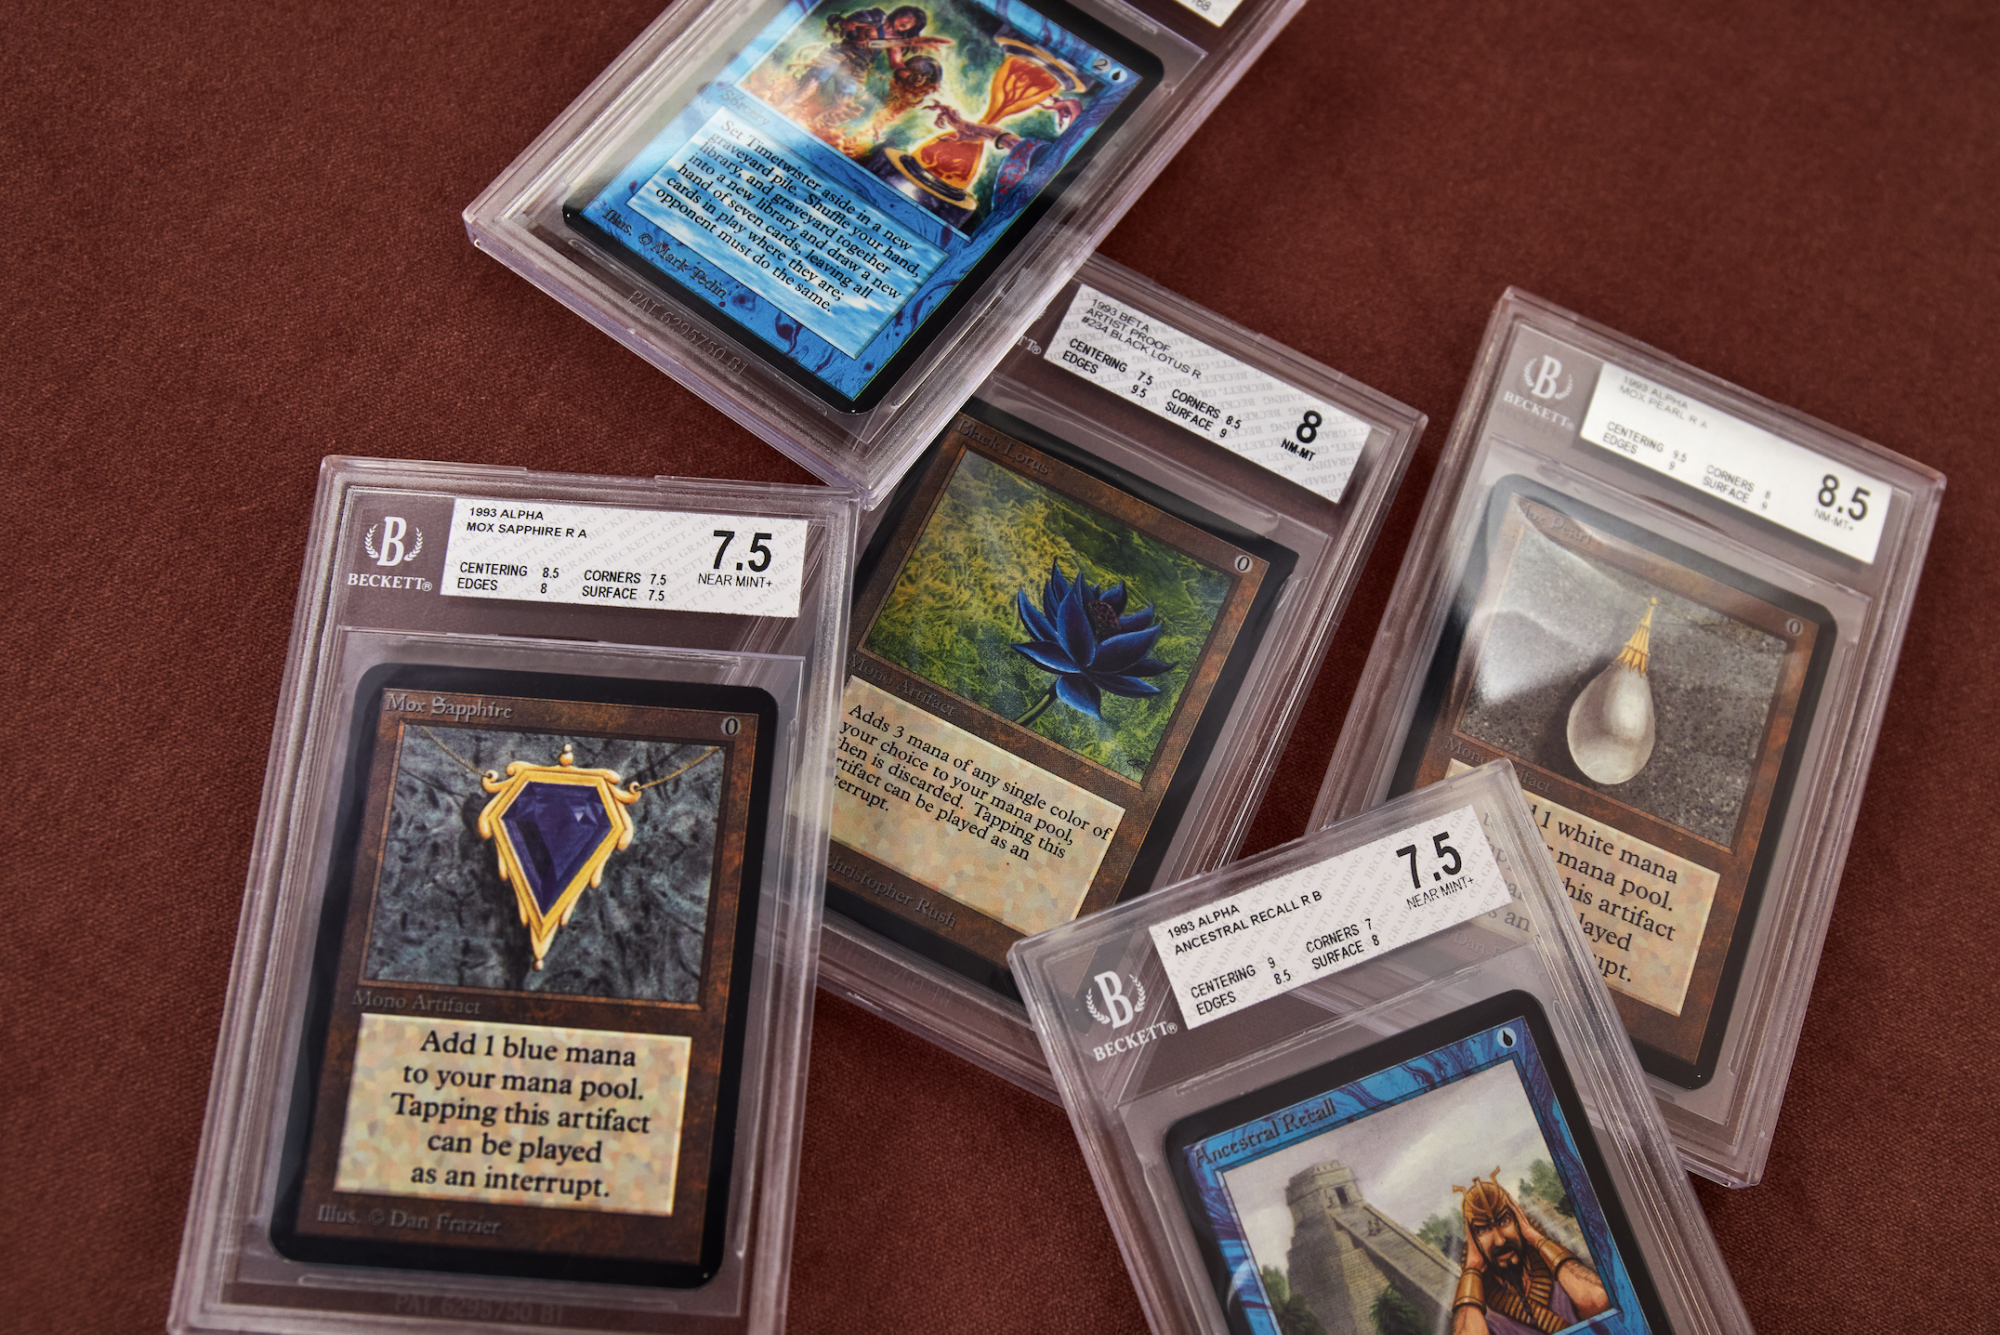 Rare Magic: The Gathering cards for sale on the RealReal.